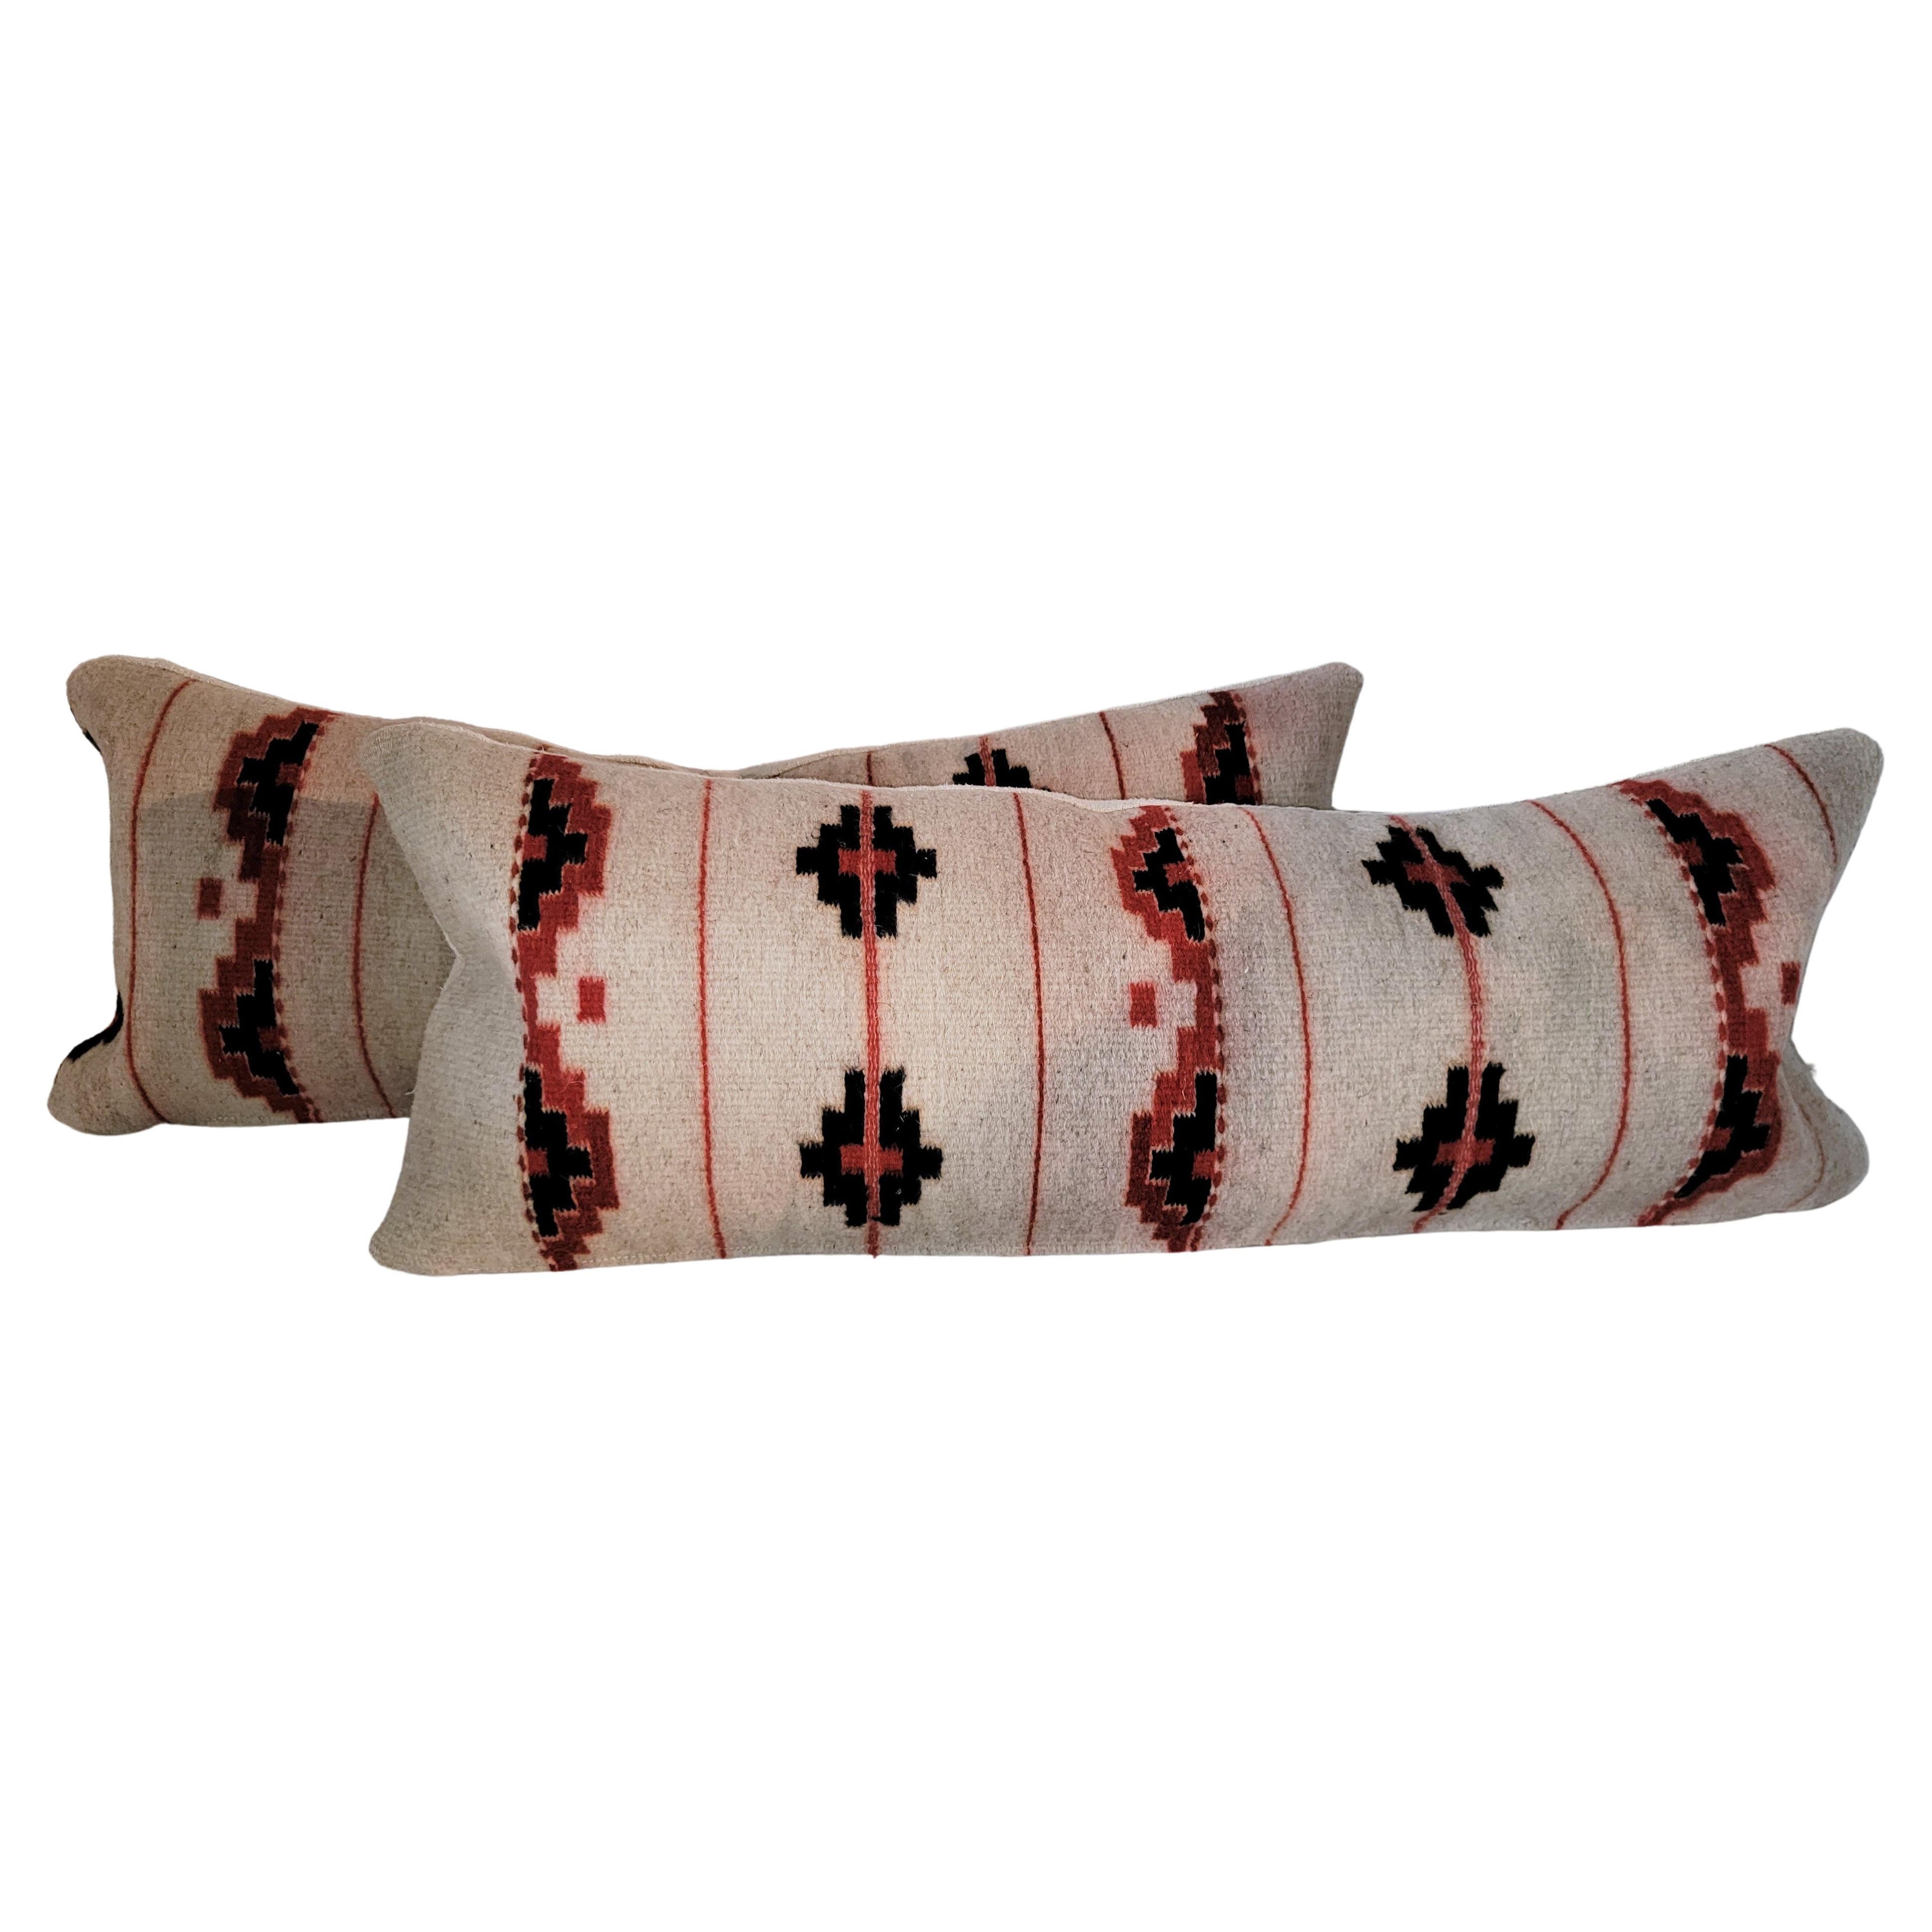 Mexican Indian Weaving Bolster Pillows, Pair For Sale